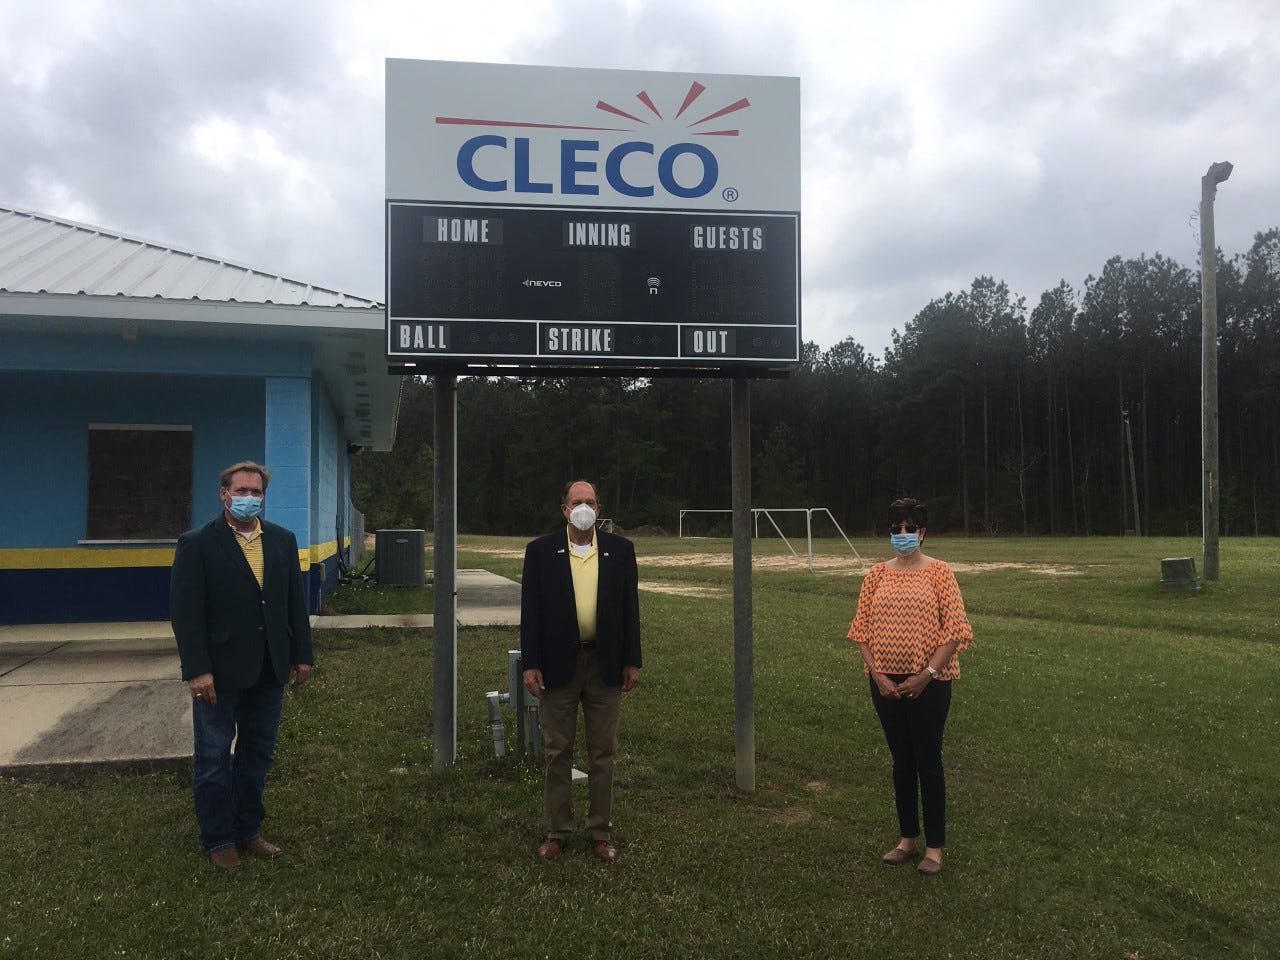 Pictured are Grant Bush, City of Leesville Director of Planning, Tripp Dungan, Cleco Principal Governmental Services Representative, and Patti Larney, City of Leesville Administrator.